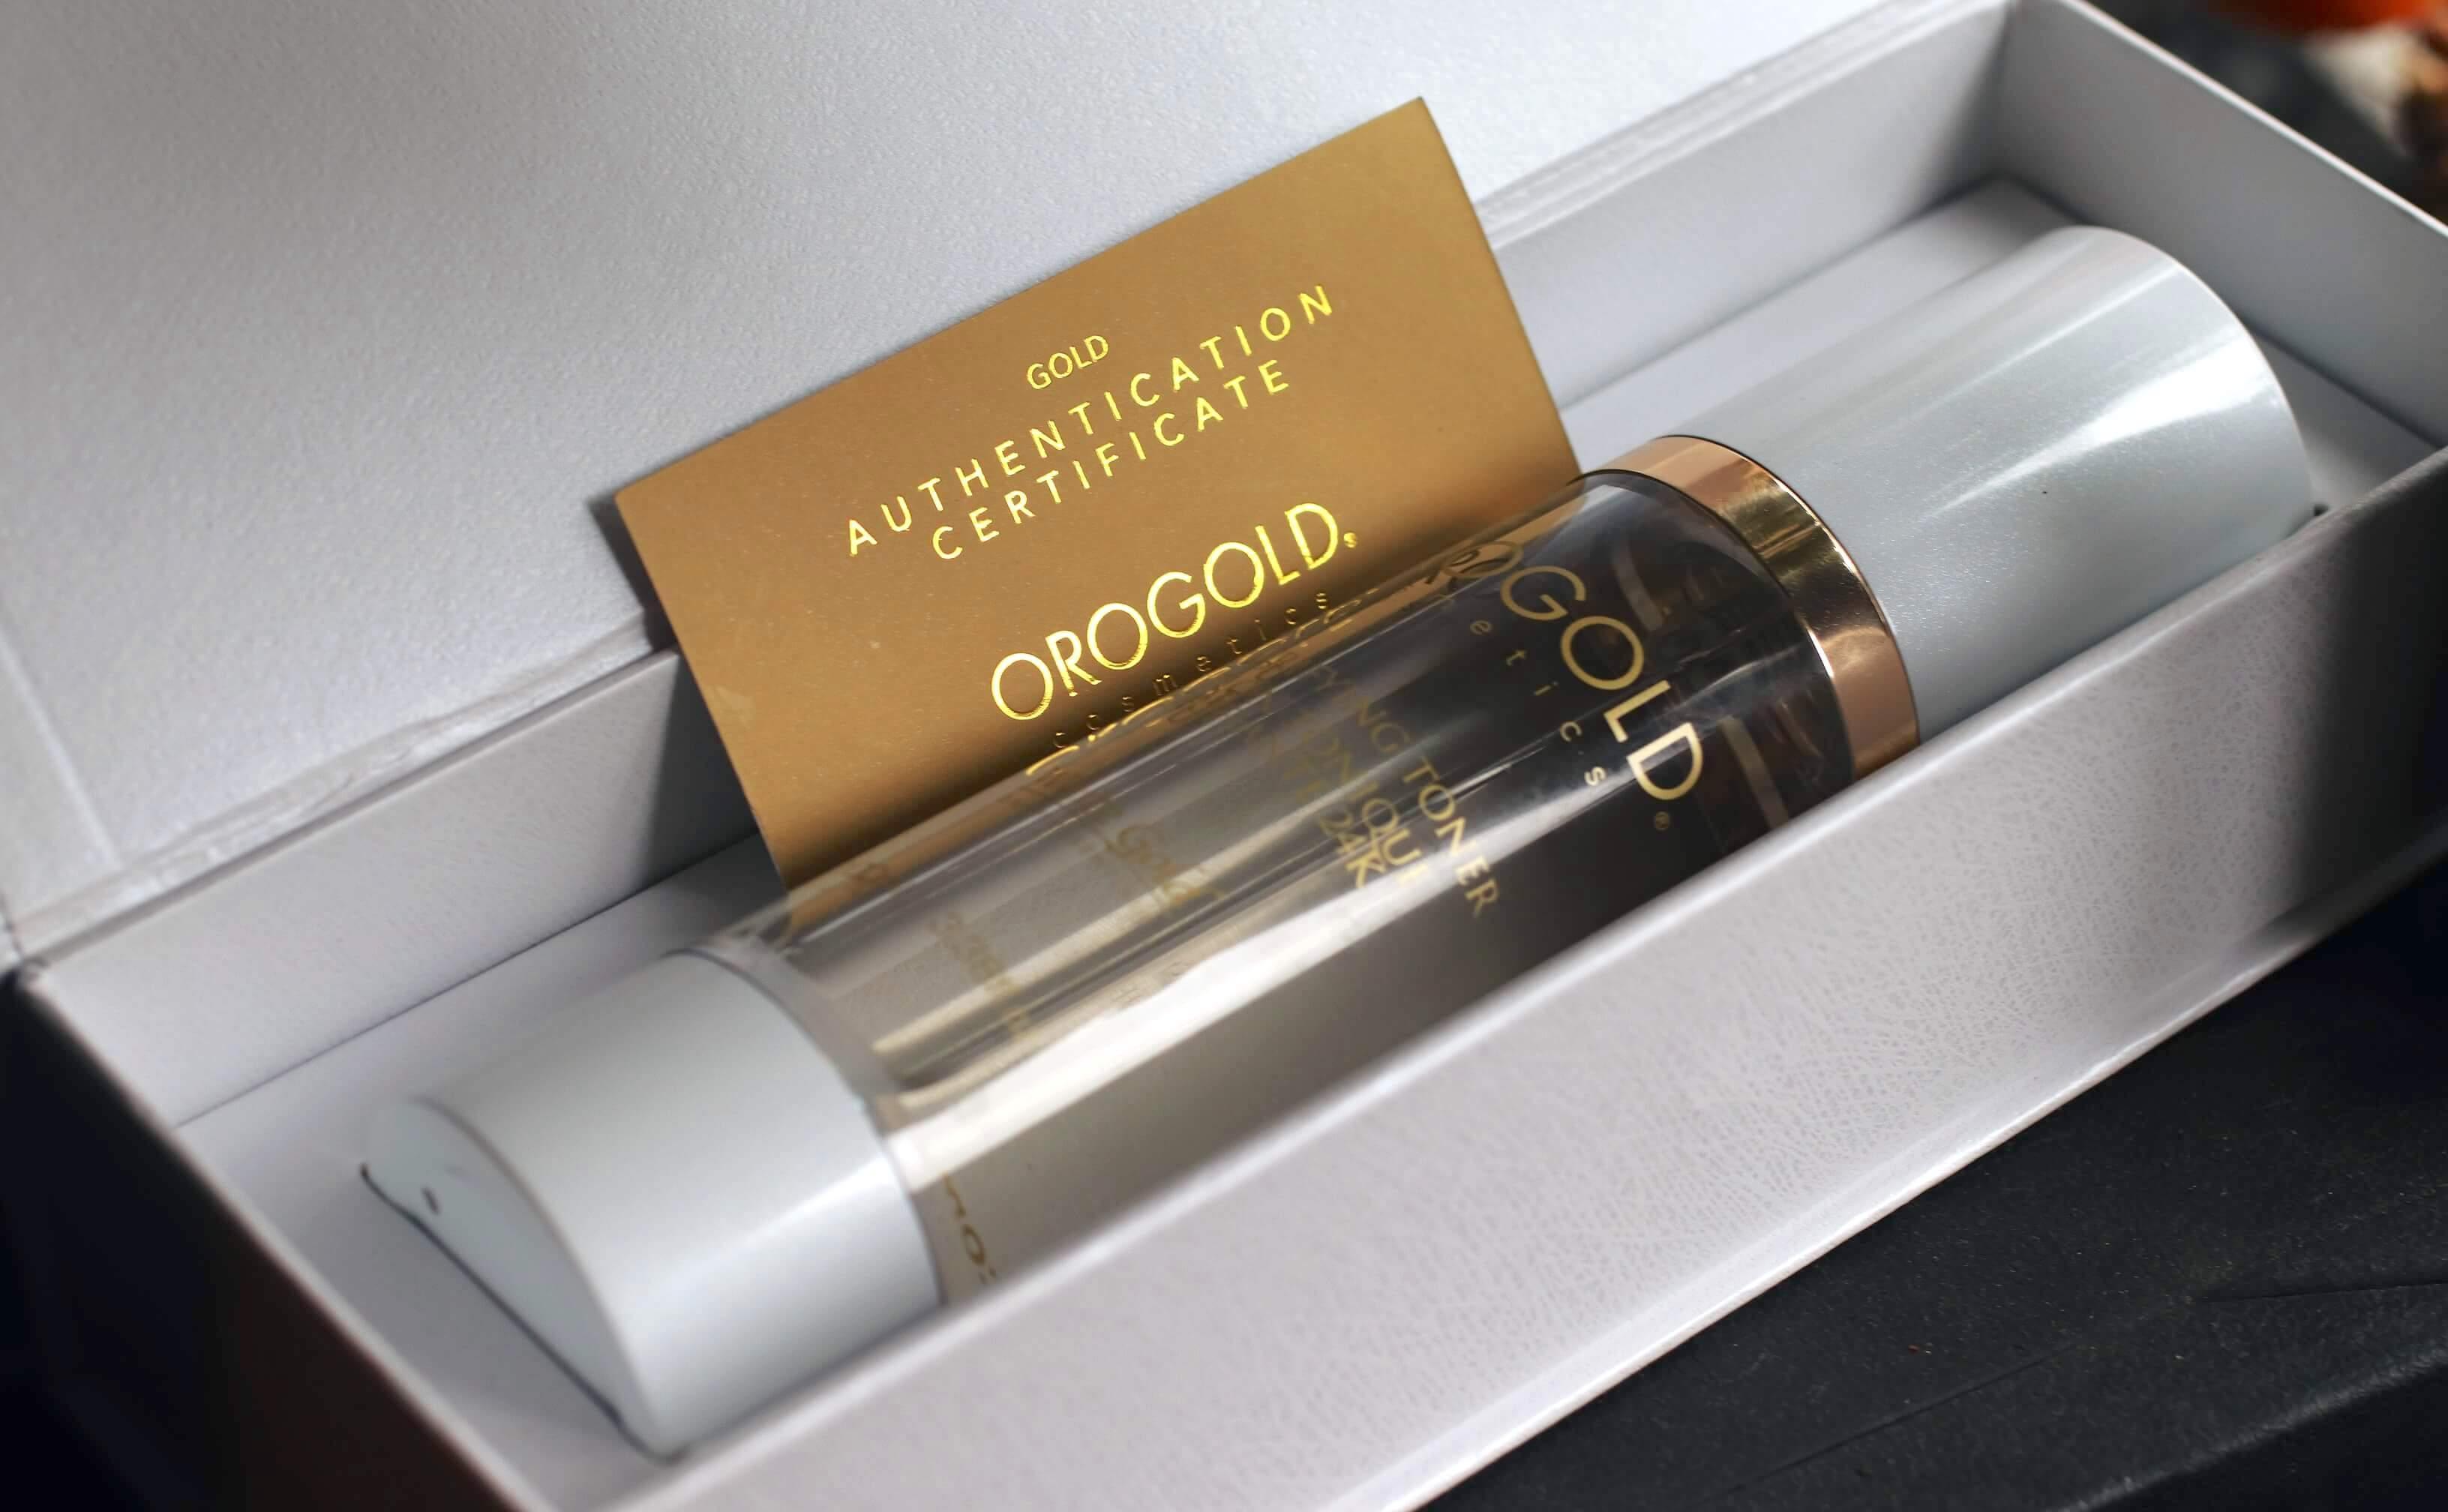 OROGOLD 24K White Gold Purifying Toner review